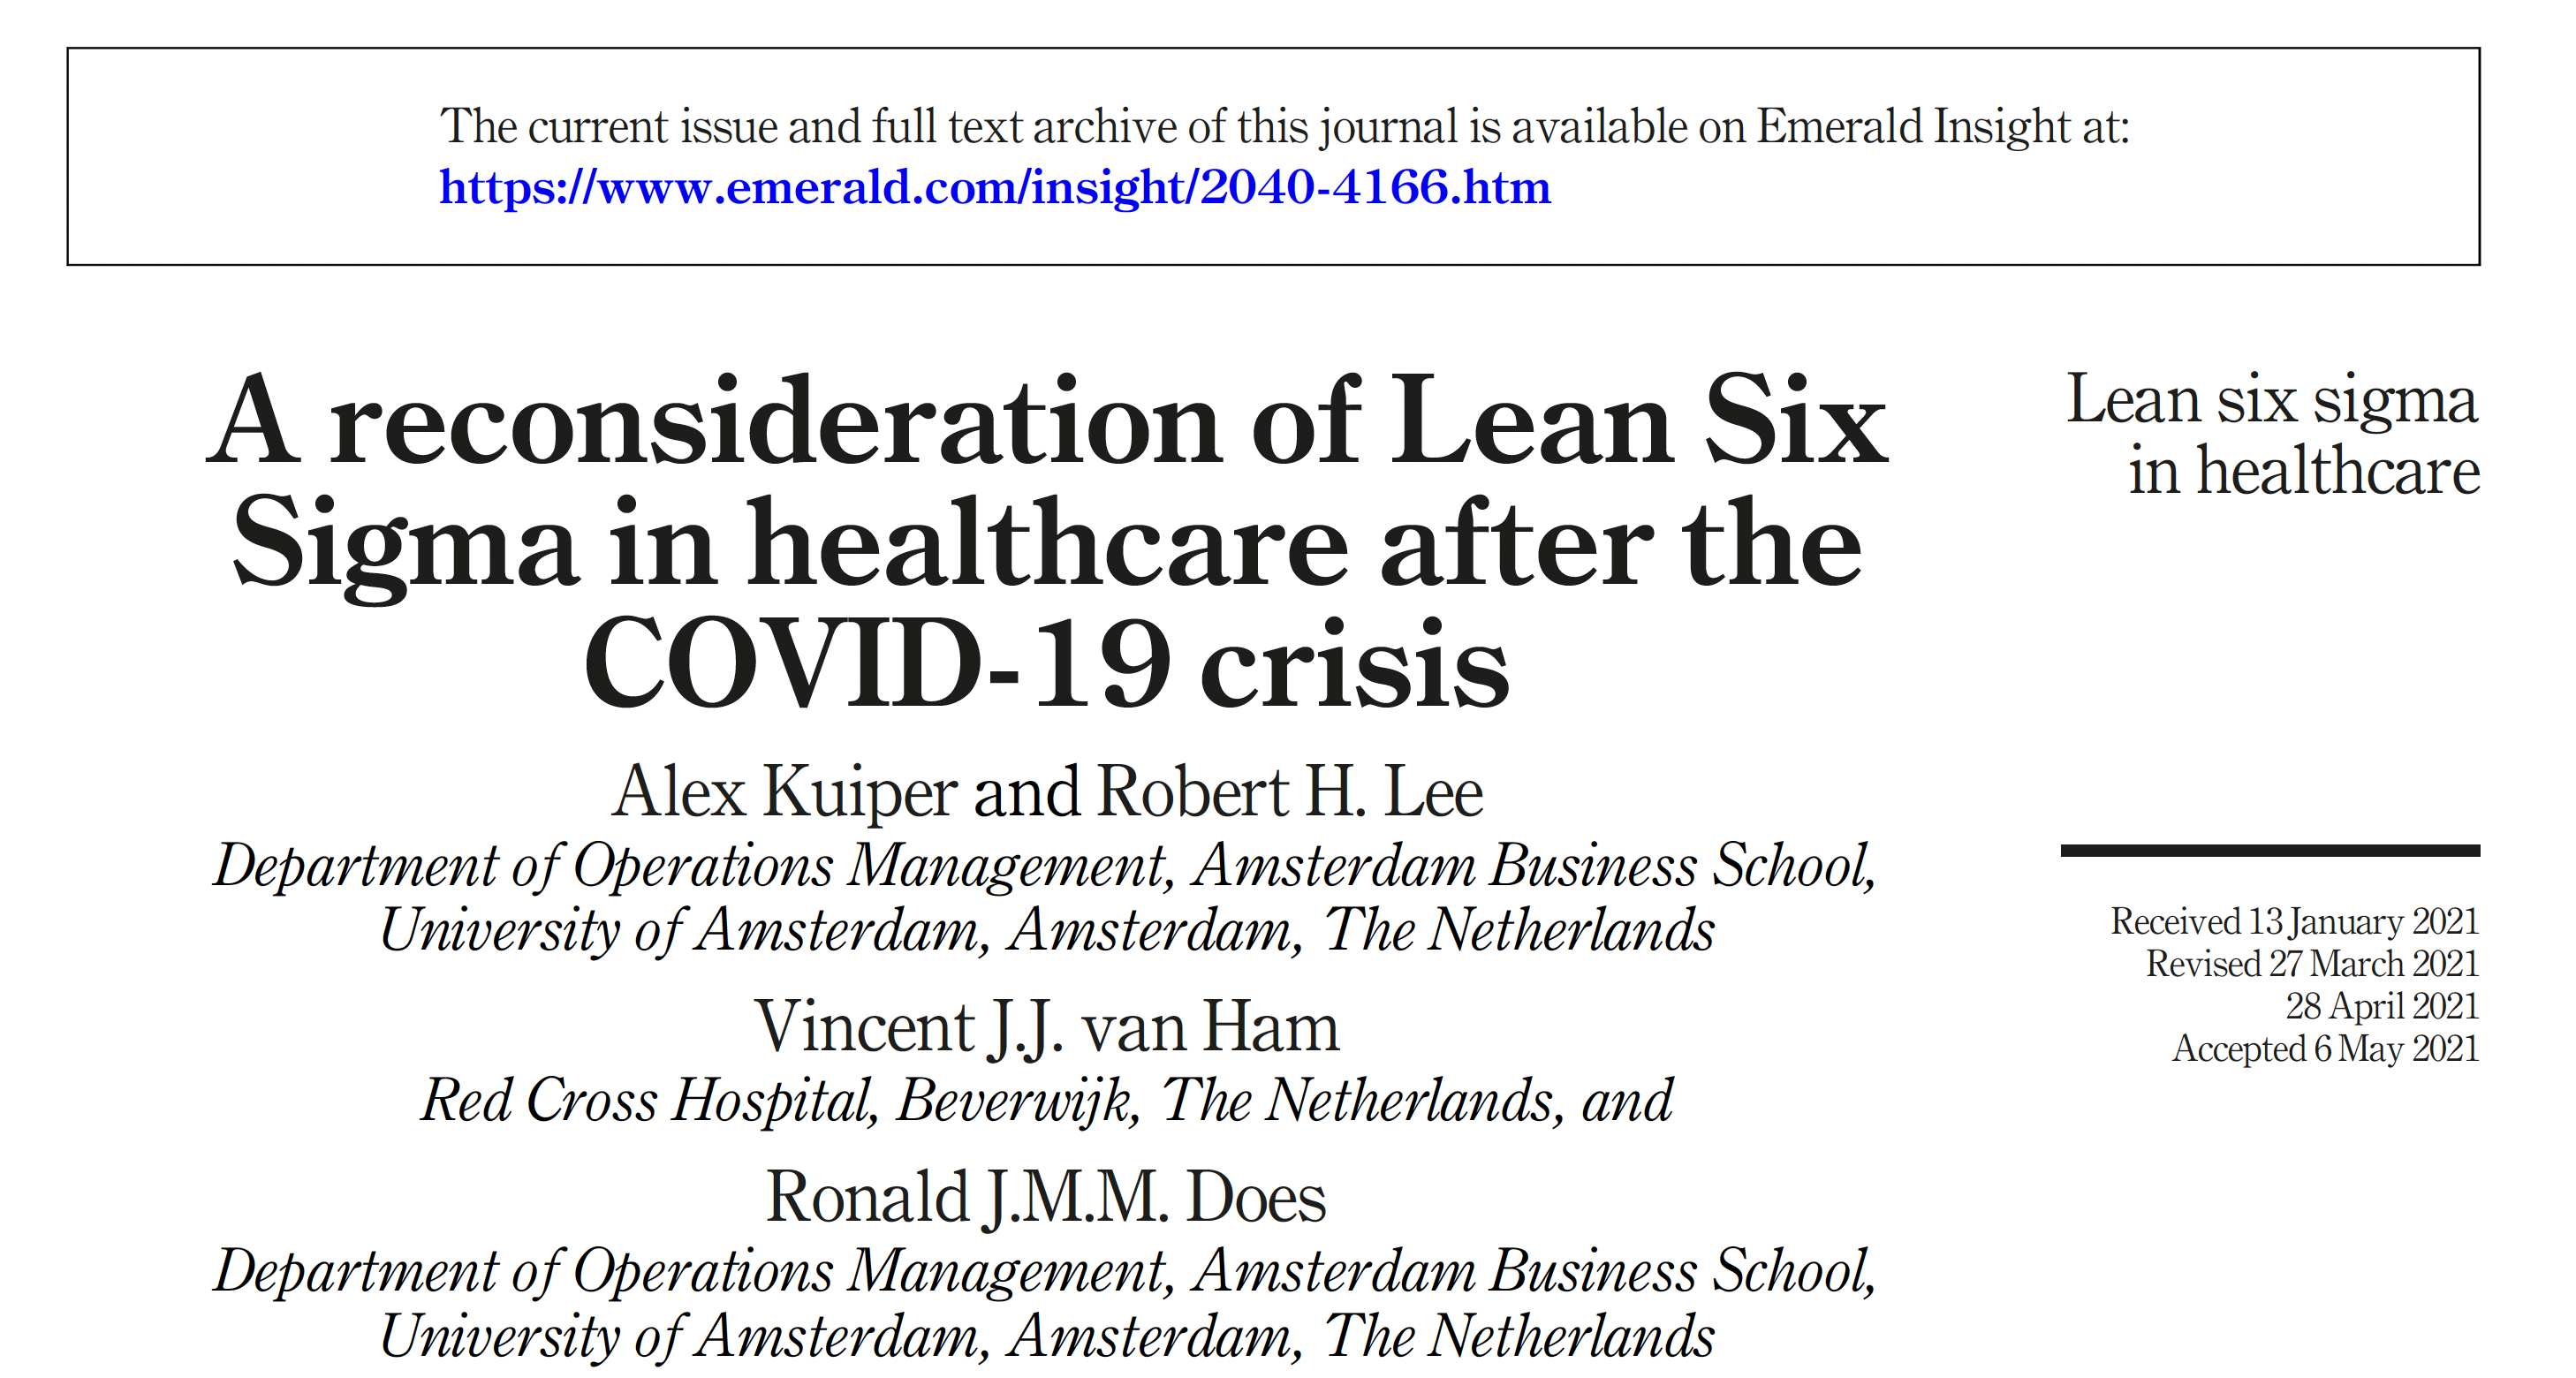 A reconsideration of Lean Six Sigma in healthcare after the COVID-19 crisis